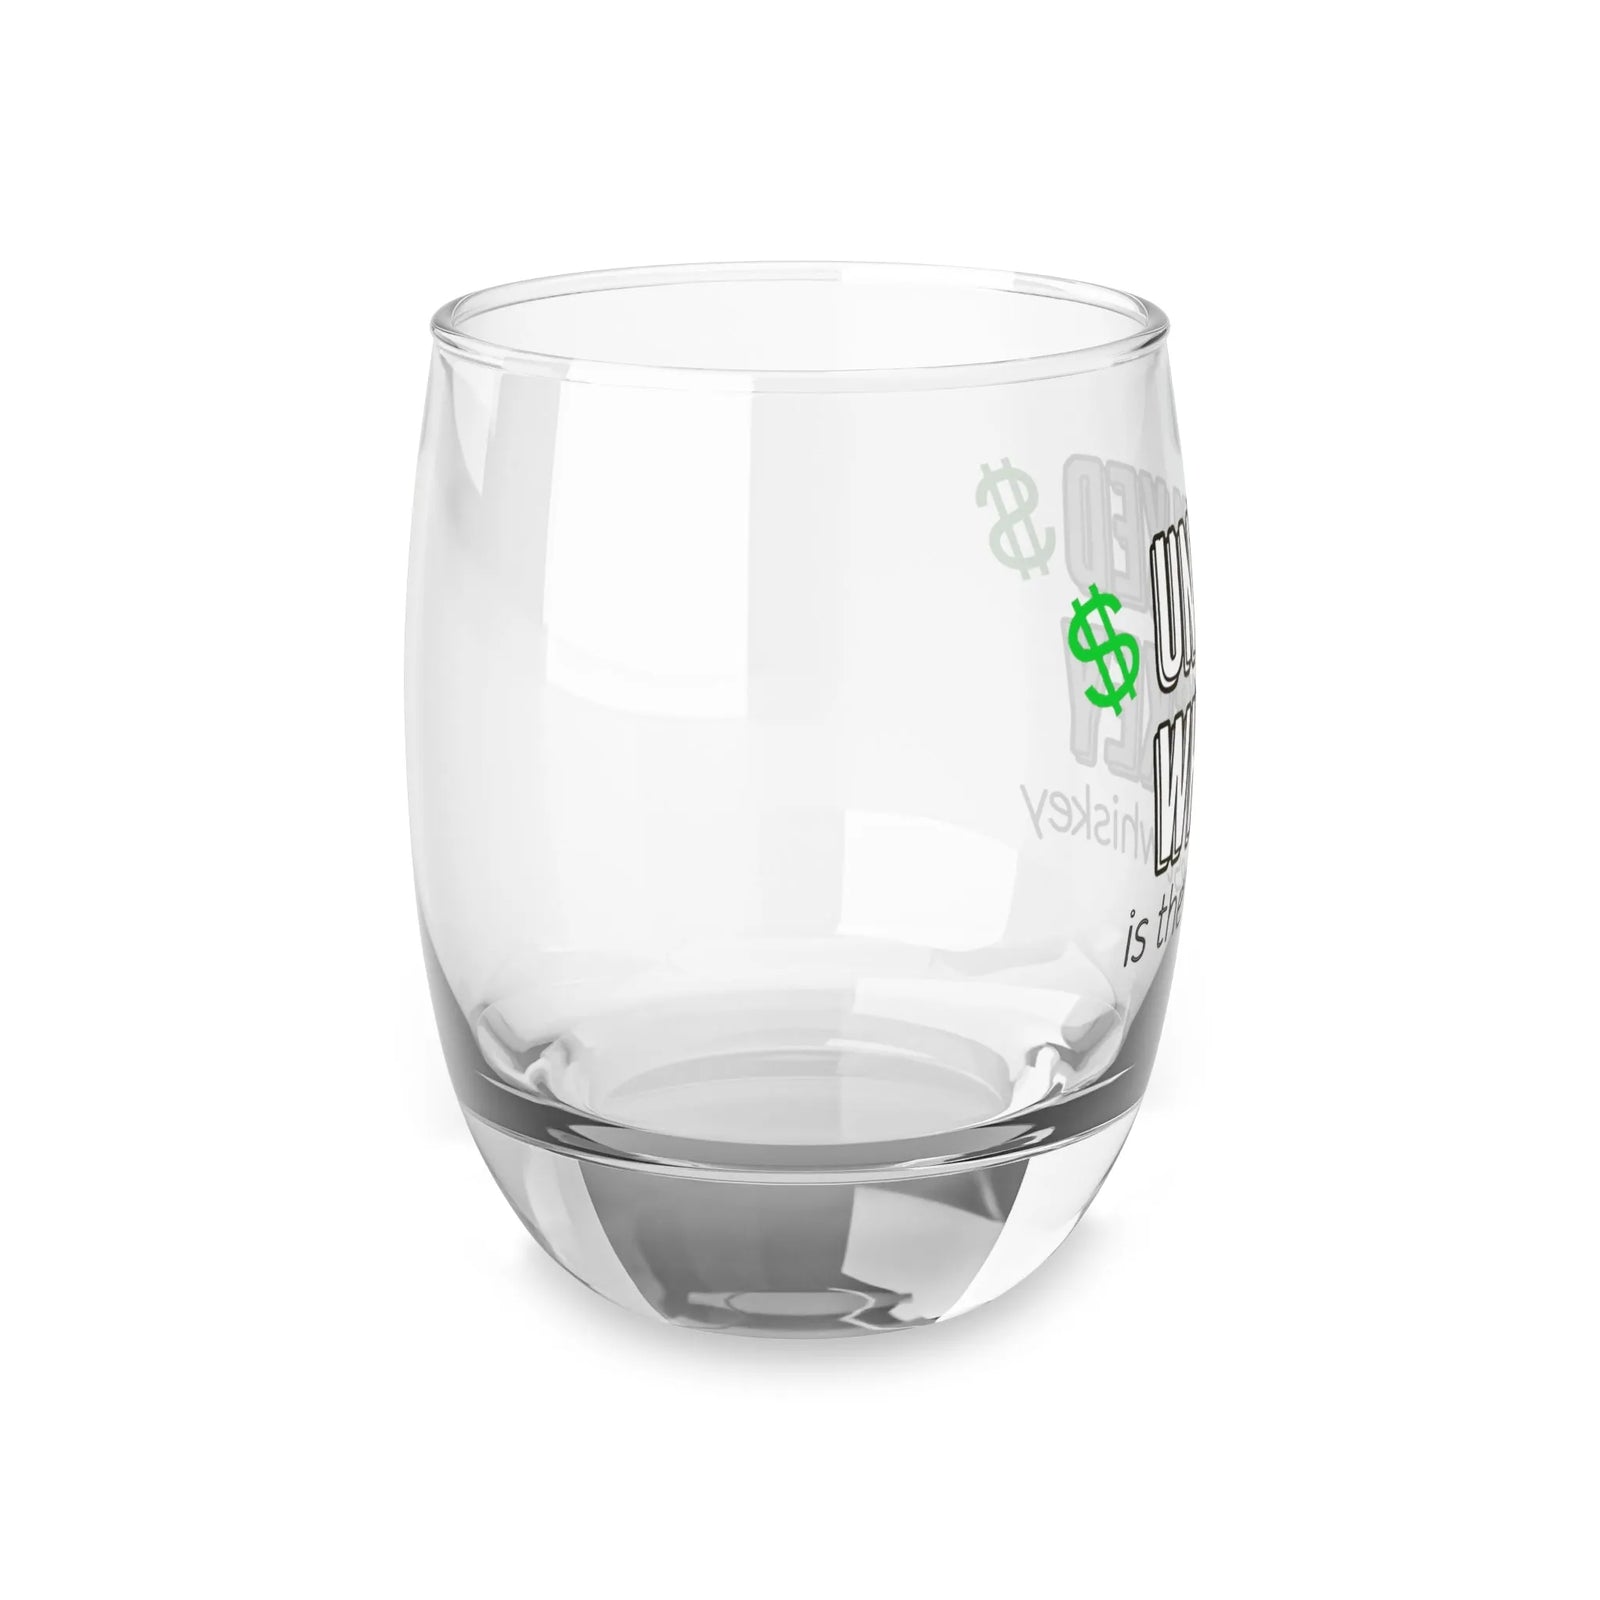 Untaxed Whiskey is the best whiskey Glass